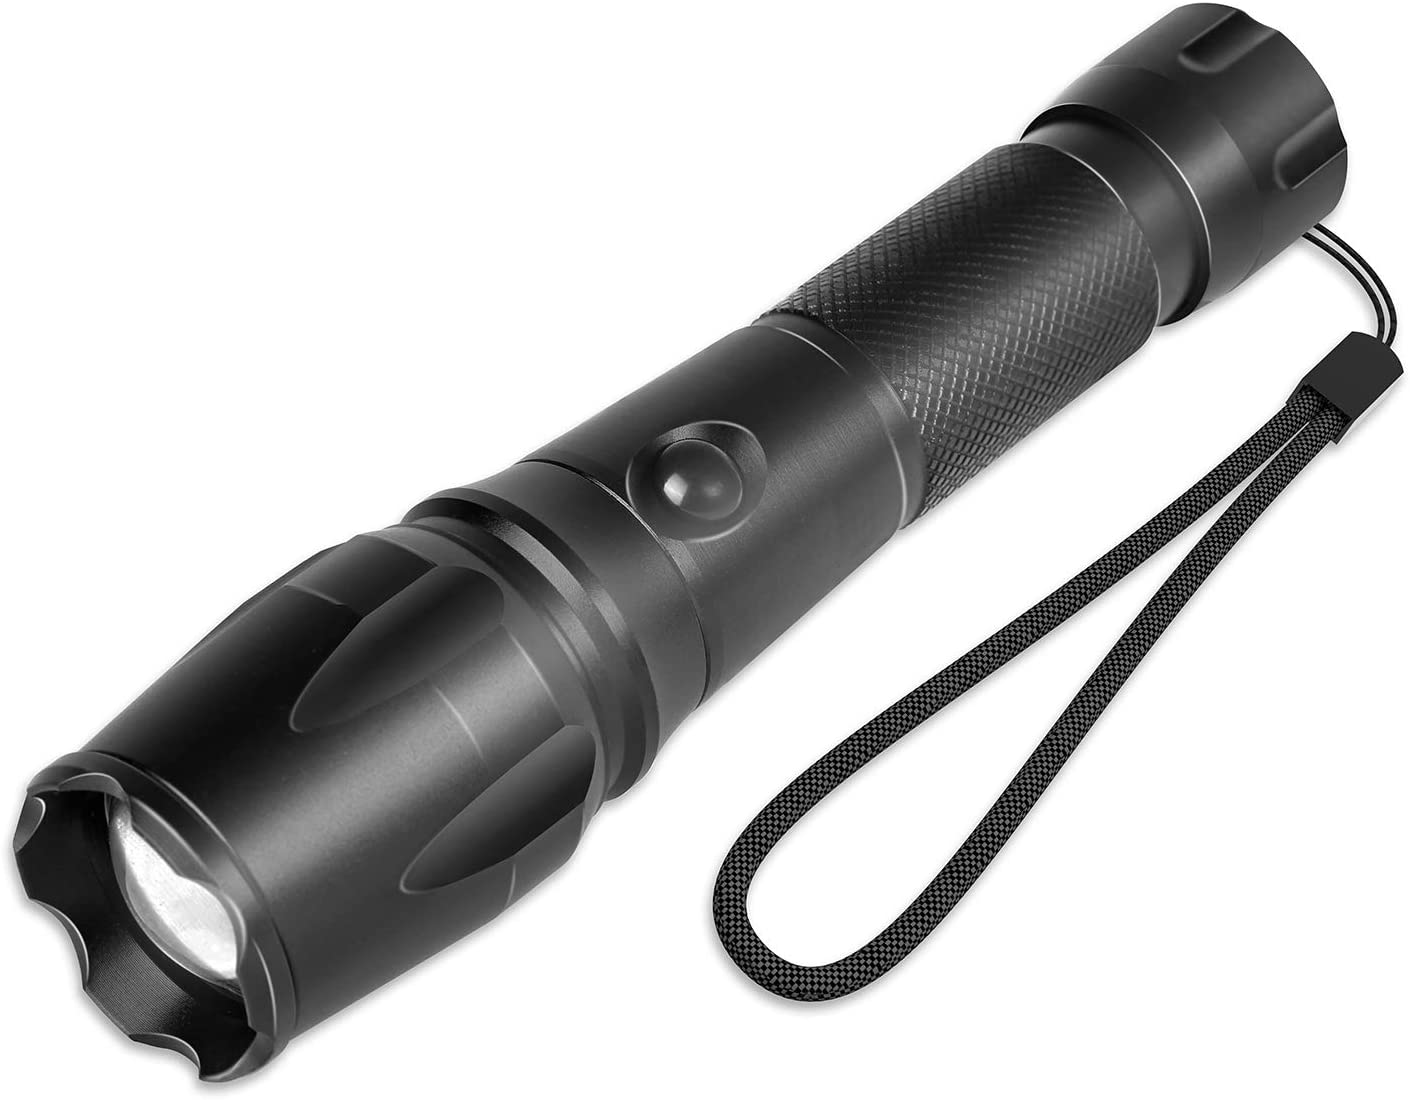 LED Tactical Flashlight, Super Bright Flashlights 1200 Lumens, Battery Powered, Water Resistant, 5 Modes with Adjustable Focus, Handheld Flashlight for Camping, Walking, Outdoor, Emergency